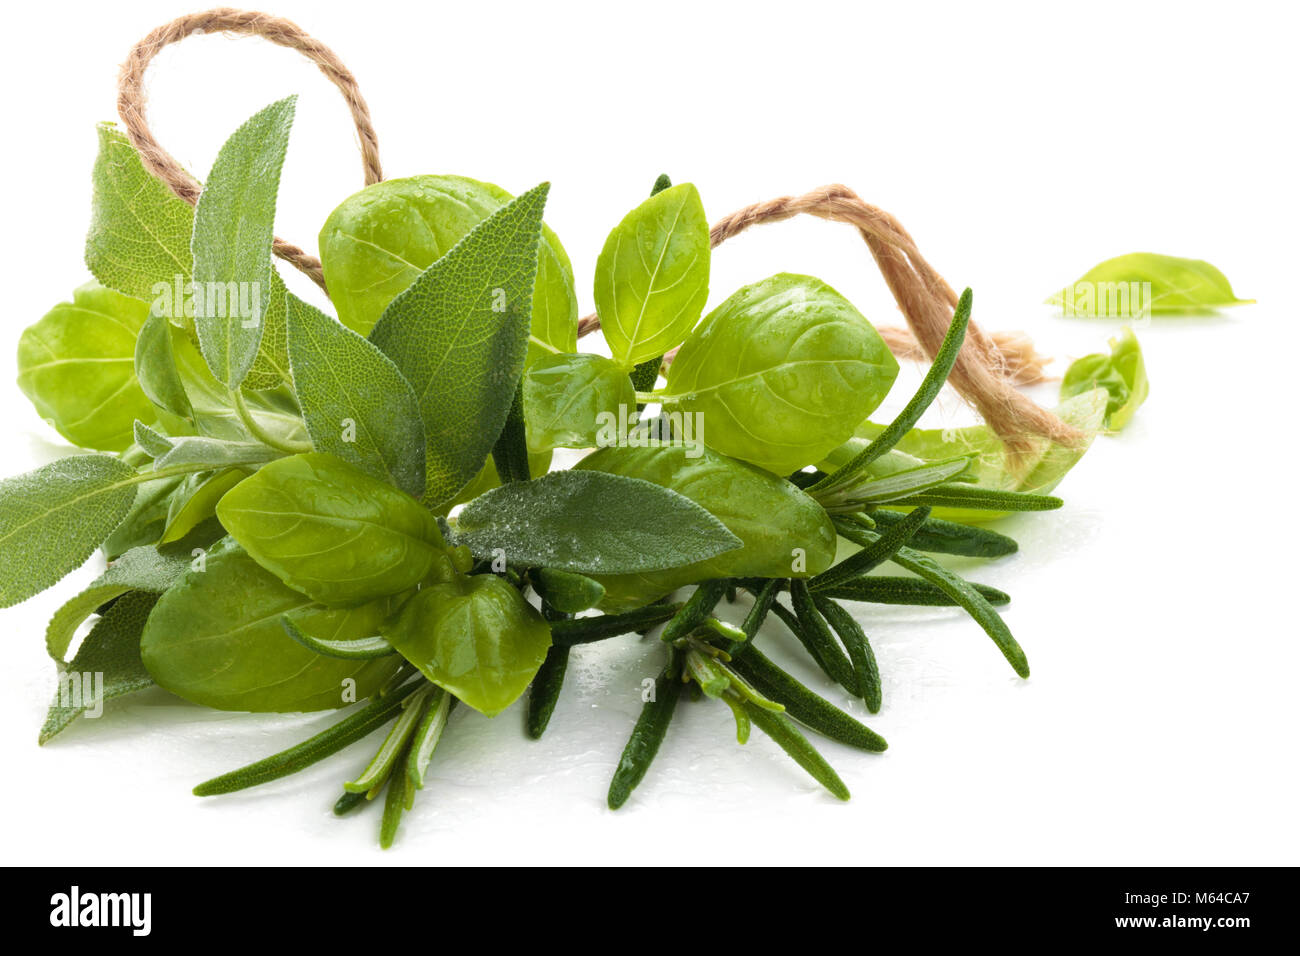 Bunch of basil, rosemary and sage. Isolated on white background. Stock Photo